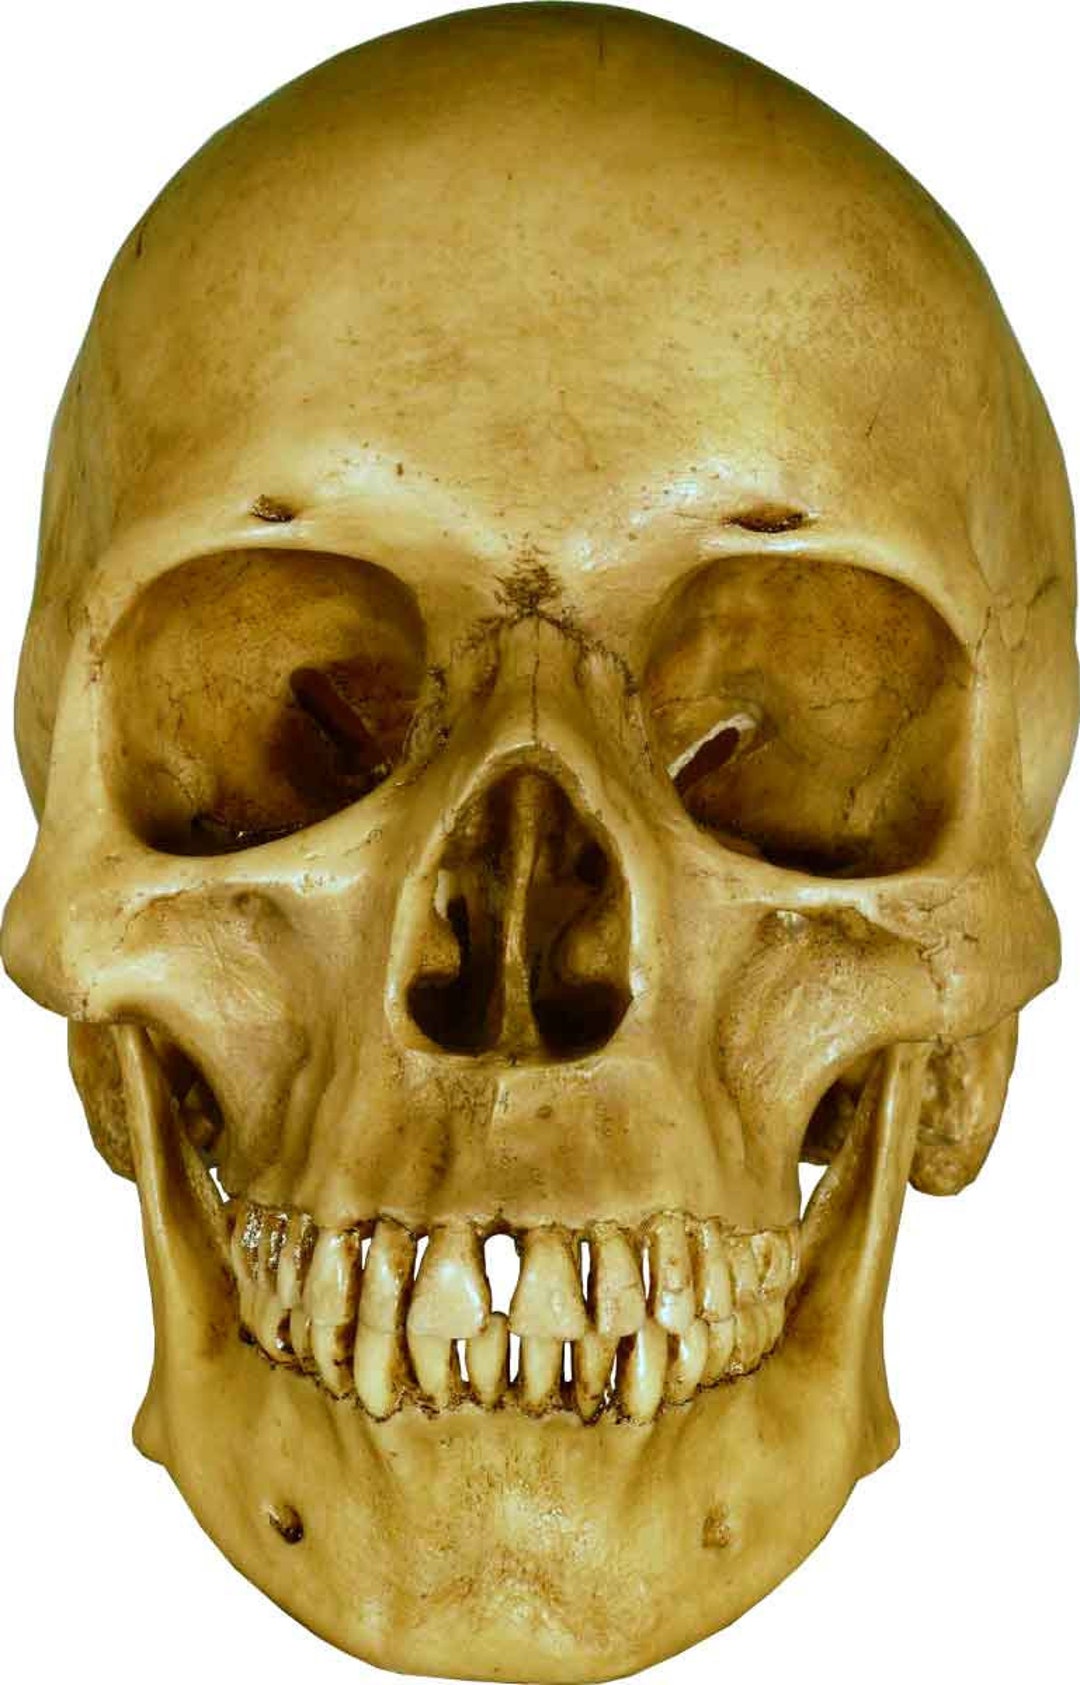 Vintage Human Skull Replica Earth Brown Aged Relic 3093-1010